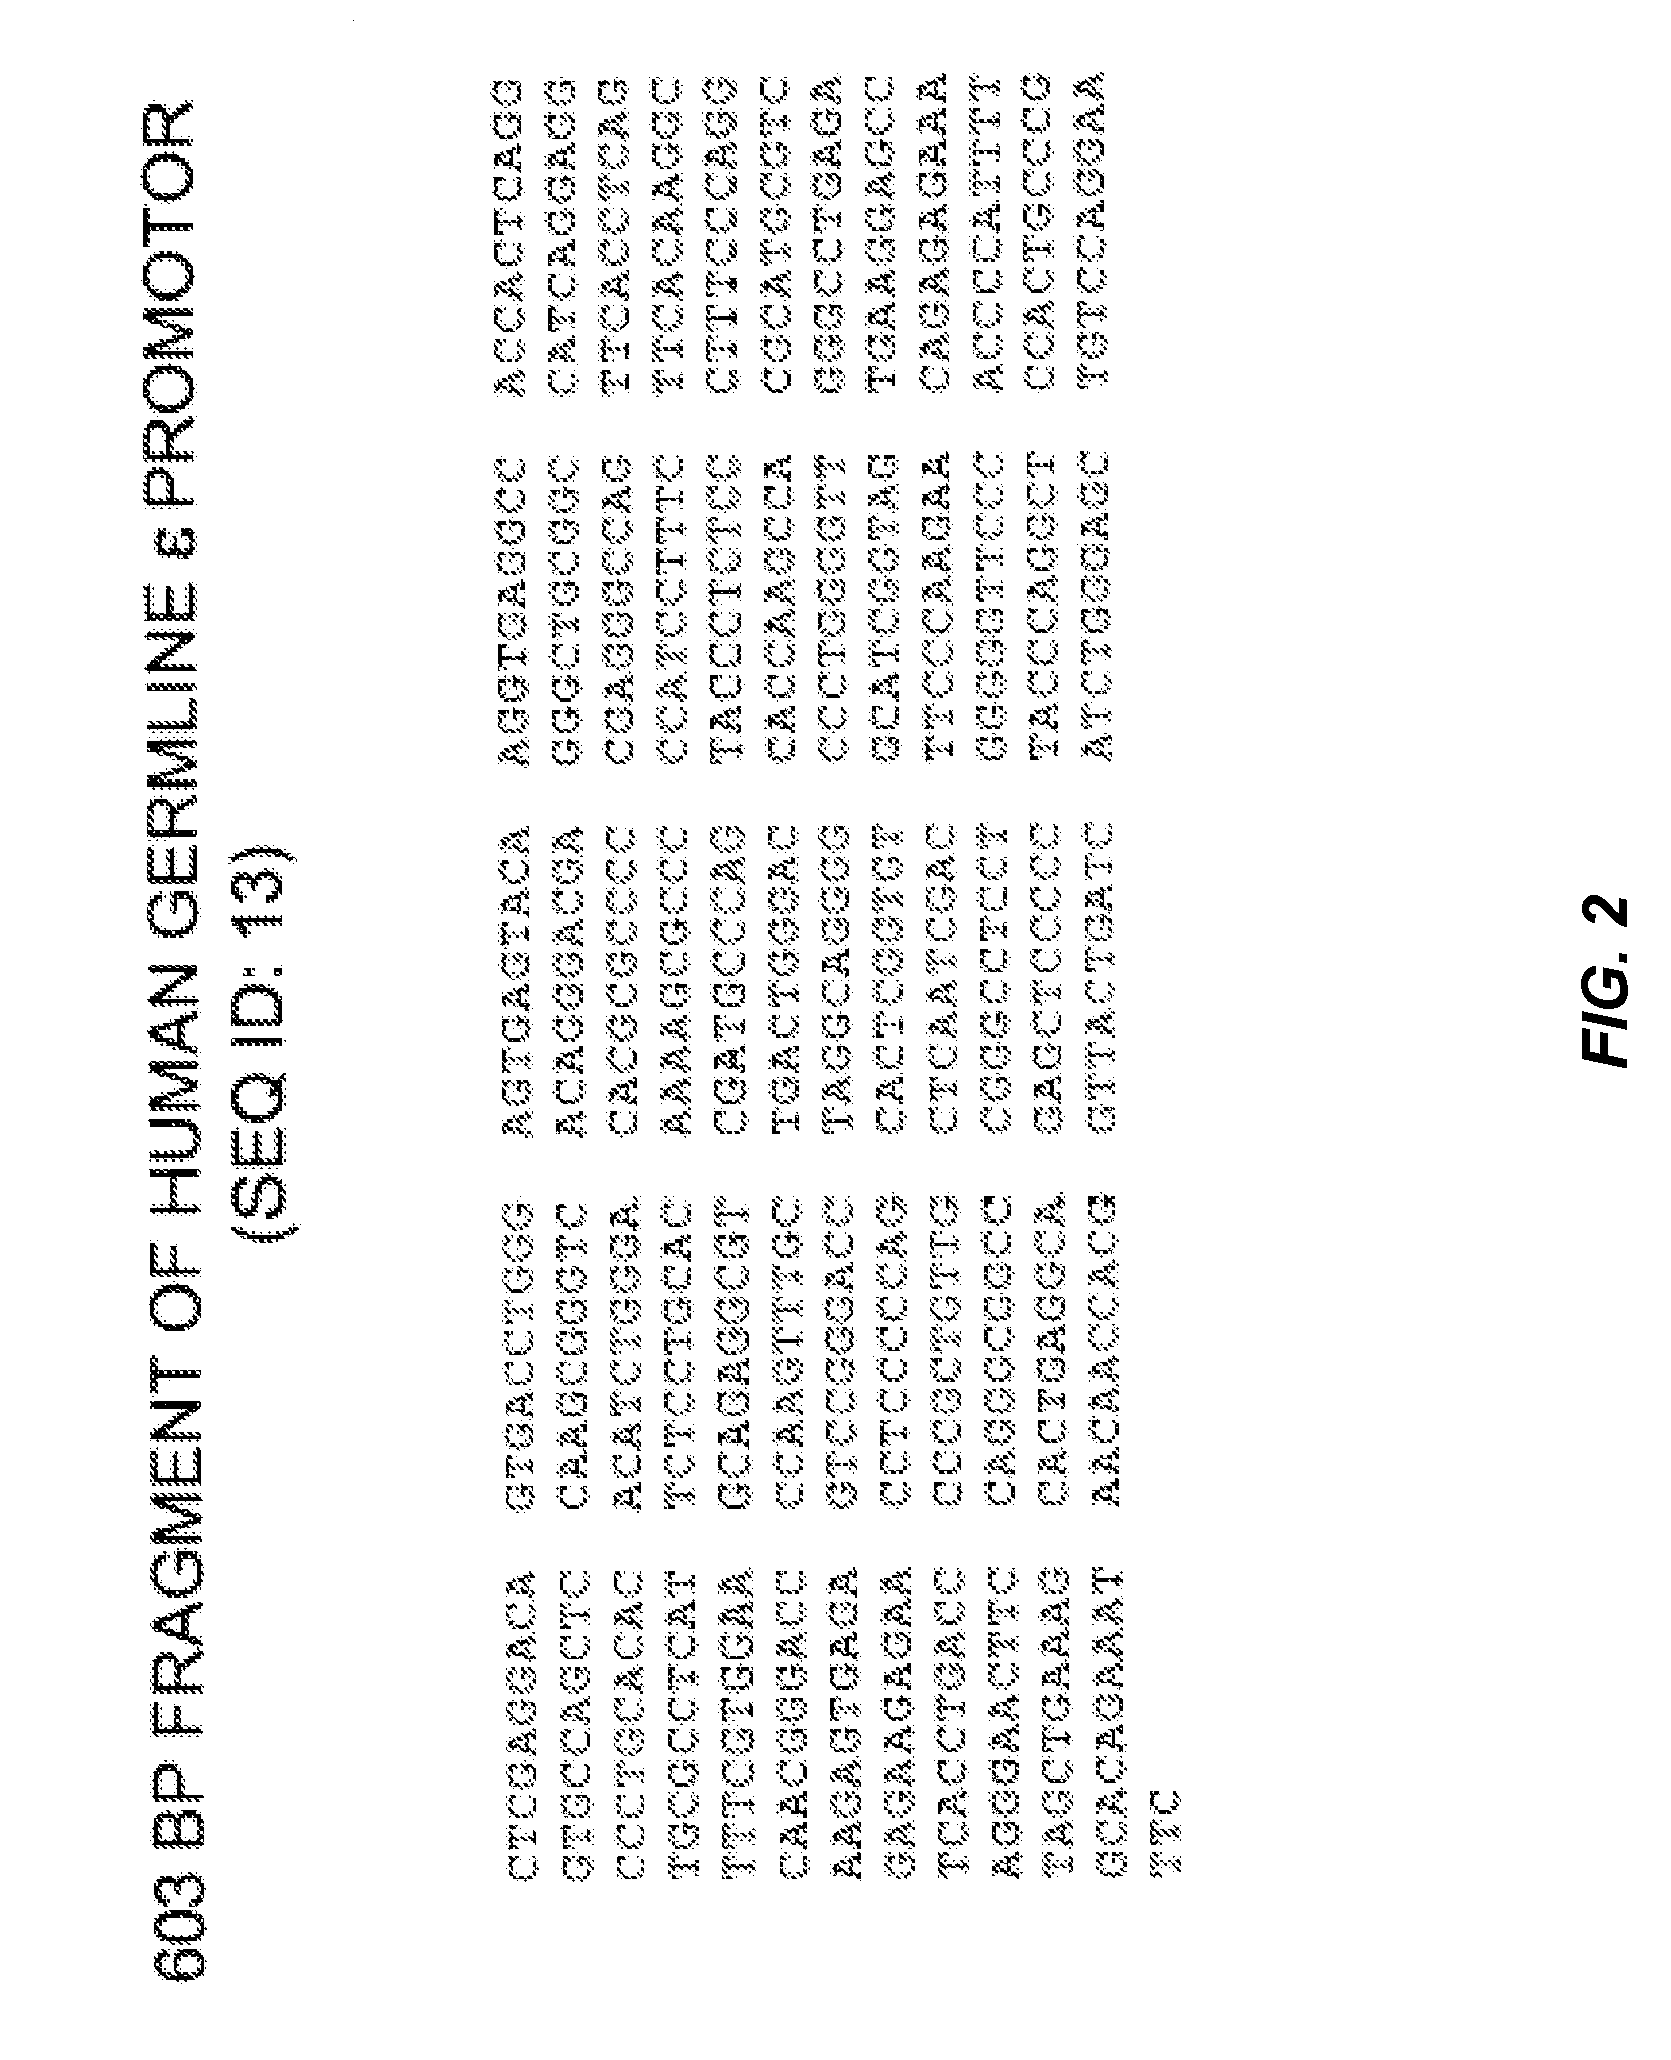 Methods of Identifying Compounds that Modulate IL-4 Receptor-Mediated IgE Synthesis Utilizing a B-Cell Associated Protein